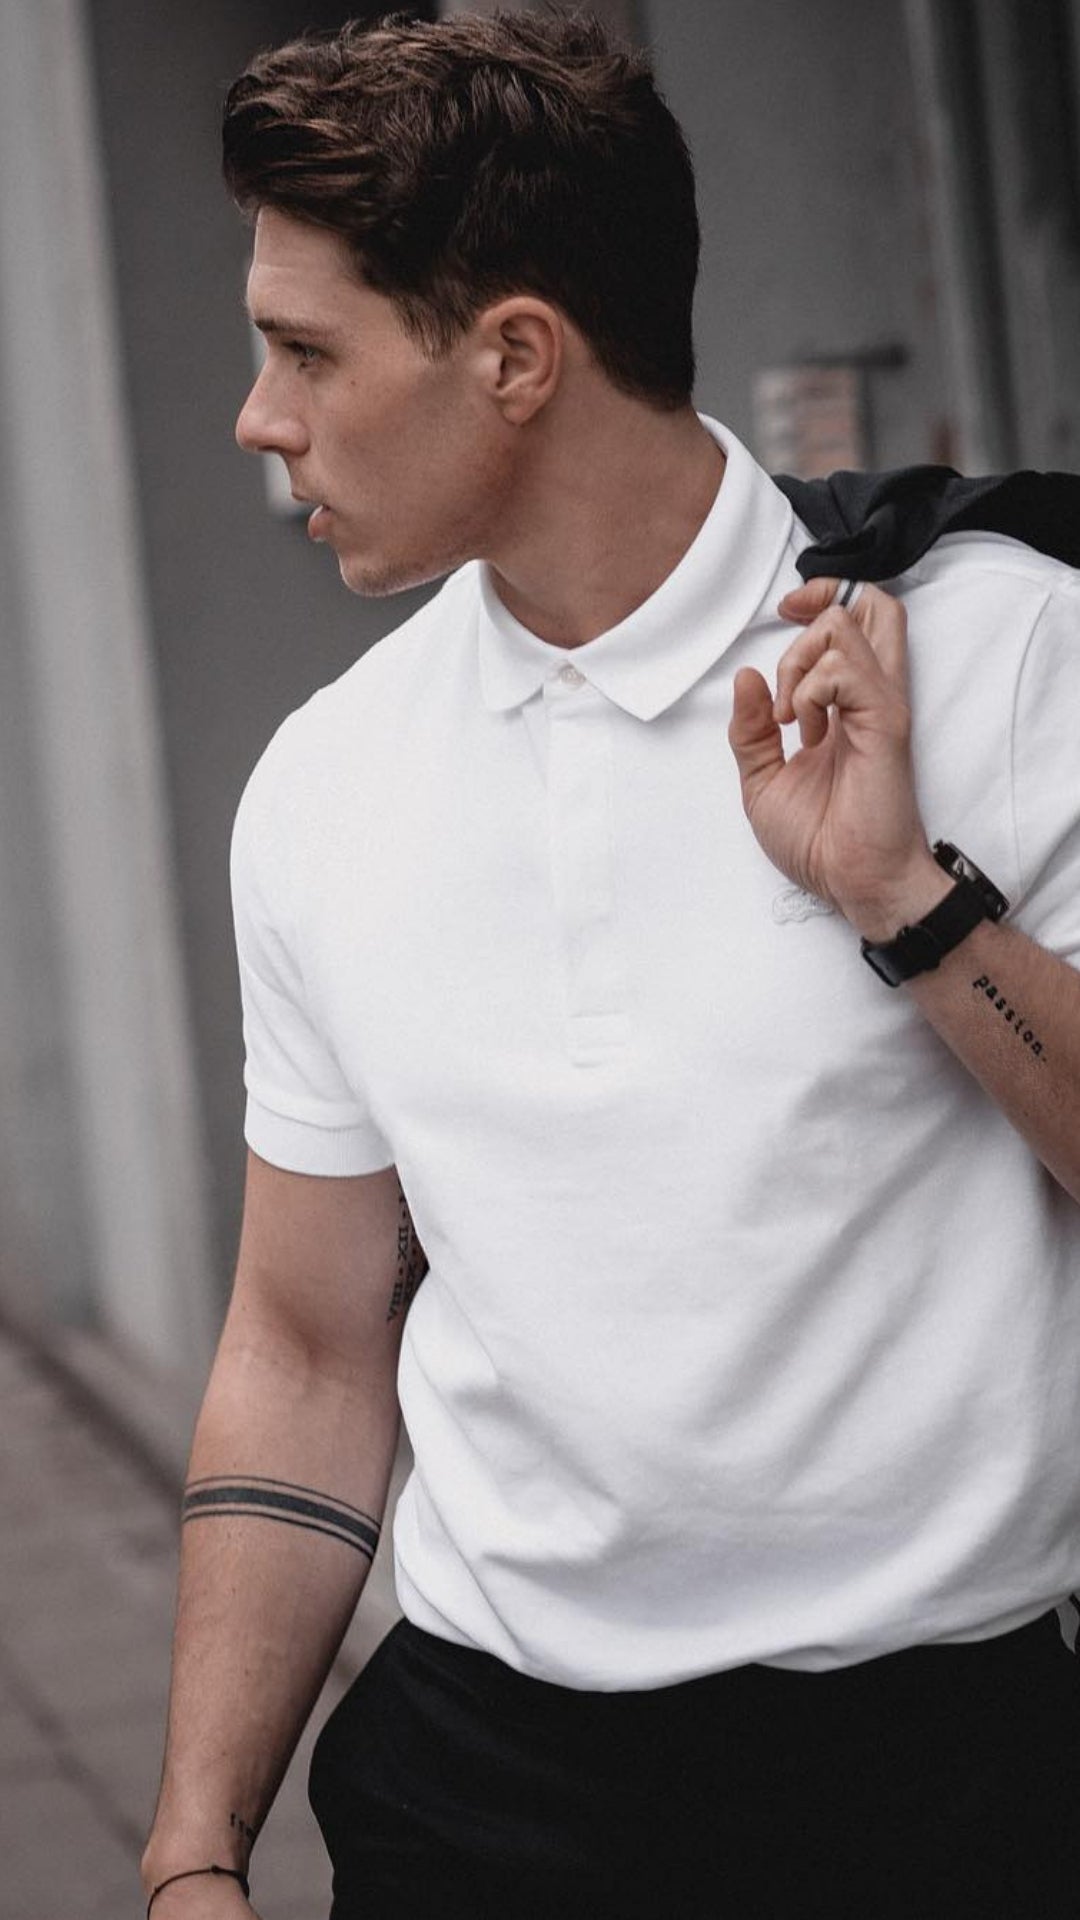 Casual Outfits For Young Guys #casual #outfits #mensfashion #streetstyle #youngguys 